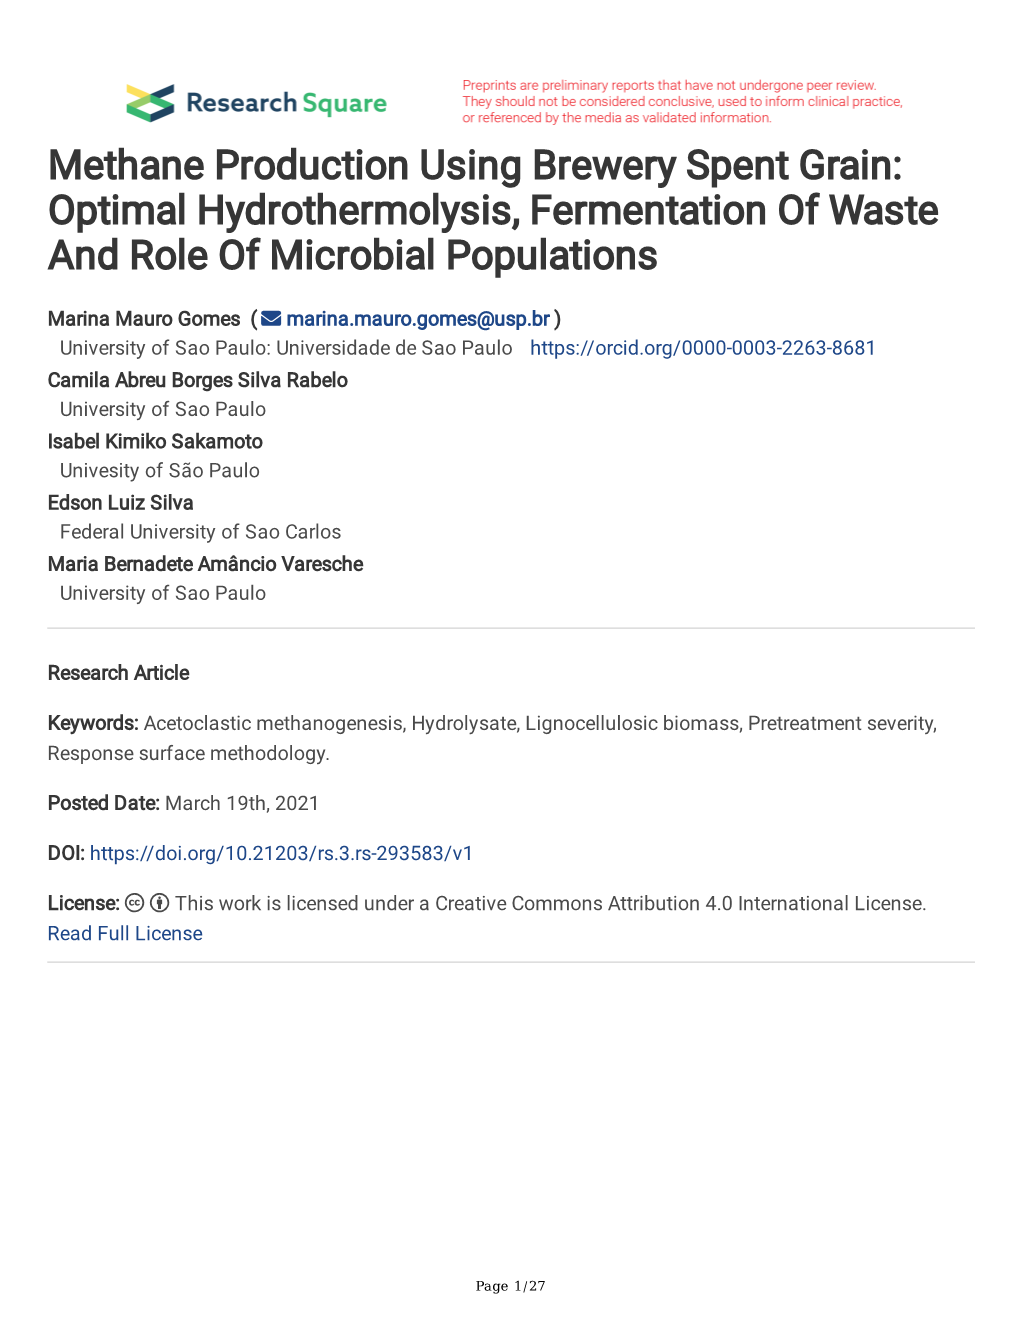 Methane Production Using Brewery Spent Grain: Optimal Hydrothermolysis, Fermentation of Waste and Role of Microbial Populations